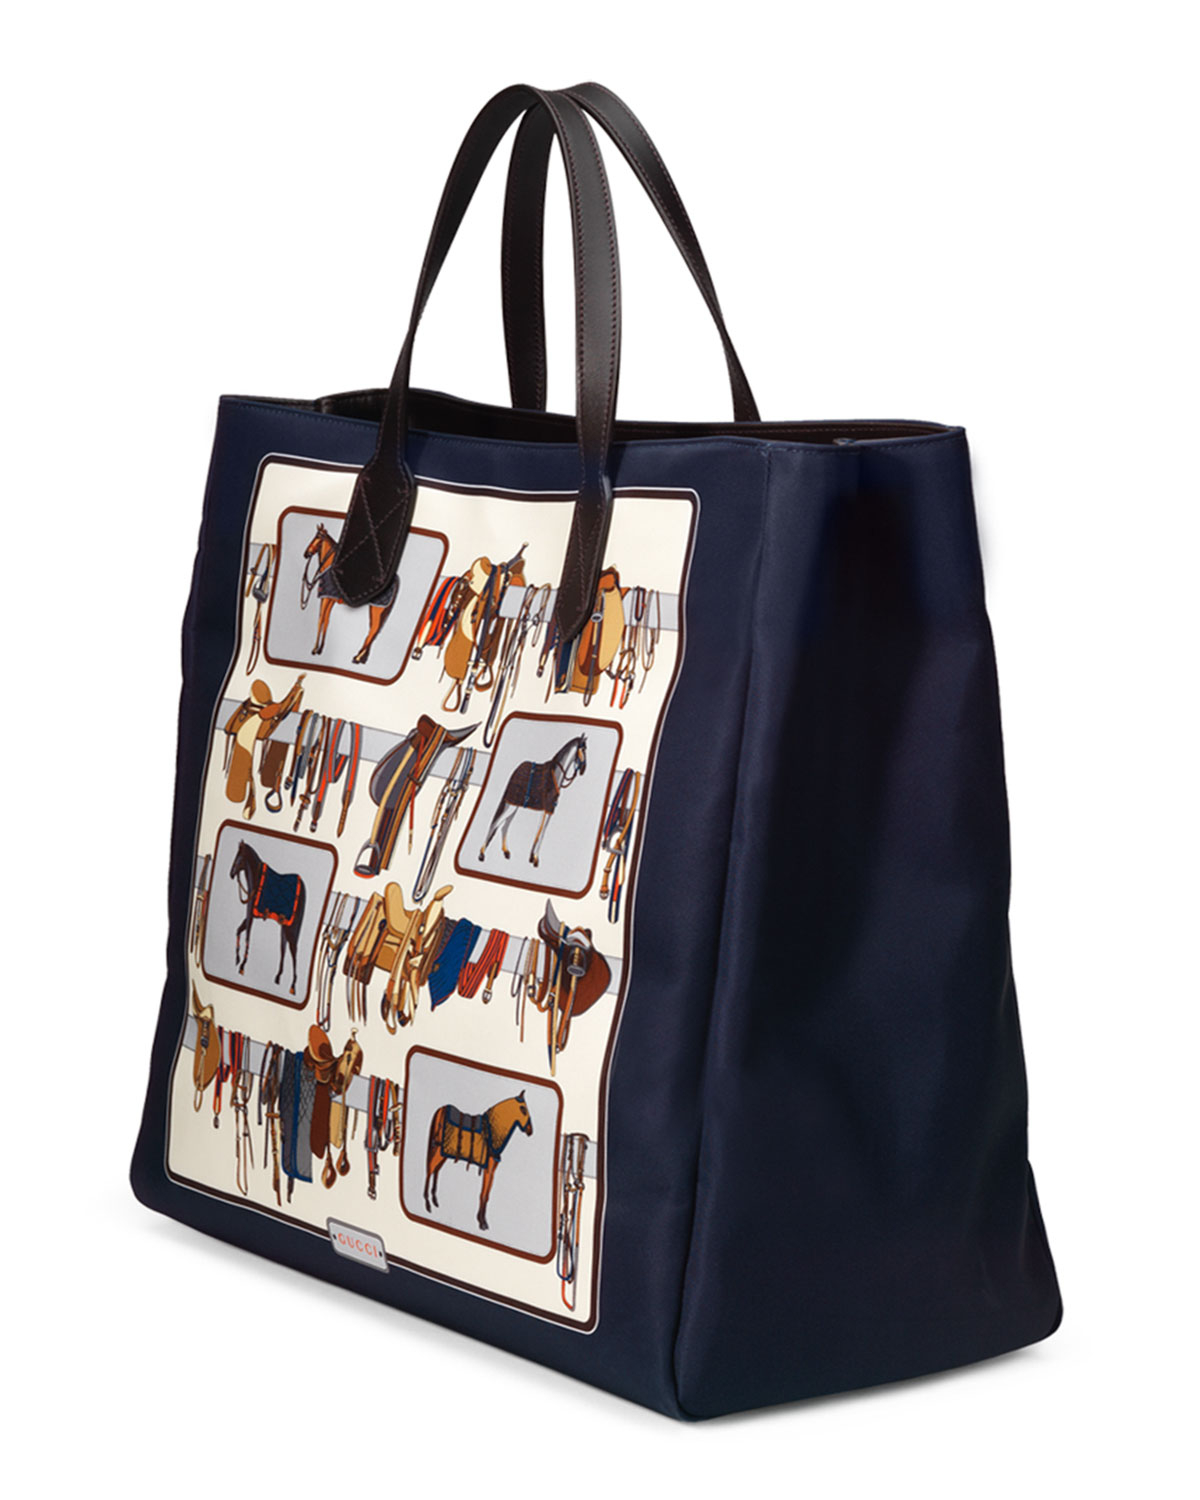 Lyst - Gucci Large Horse Frame-print Tote Bag in Black